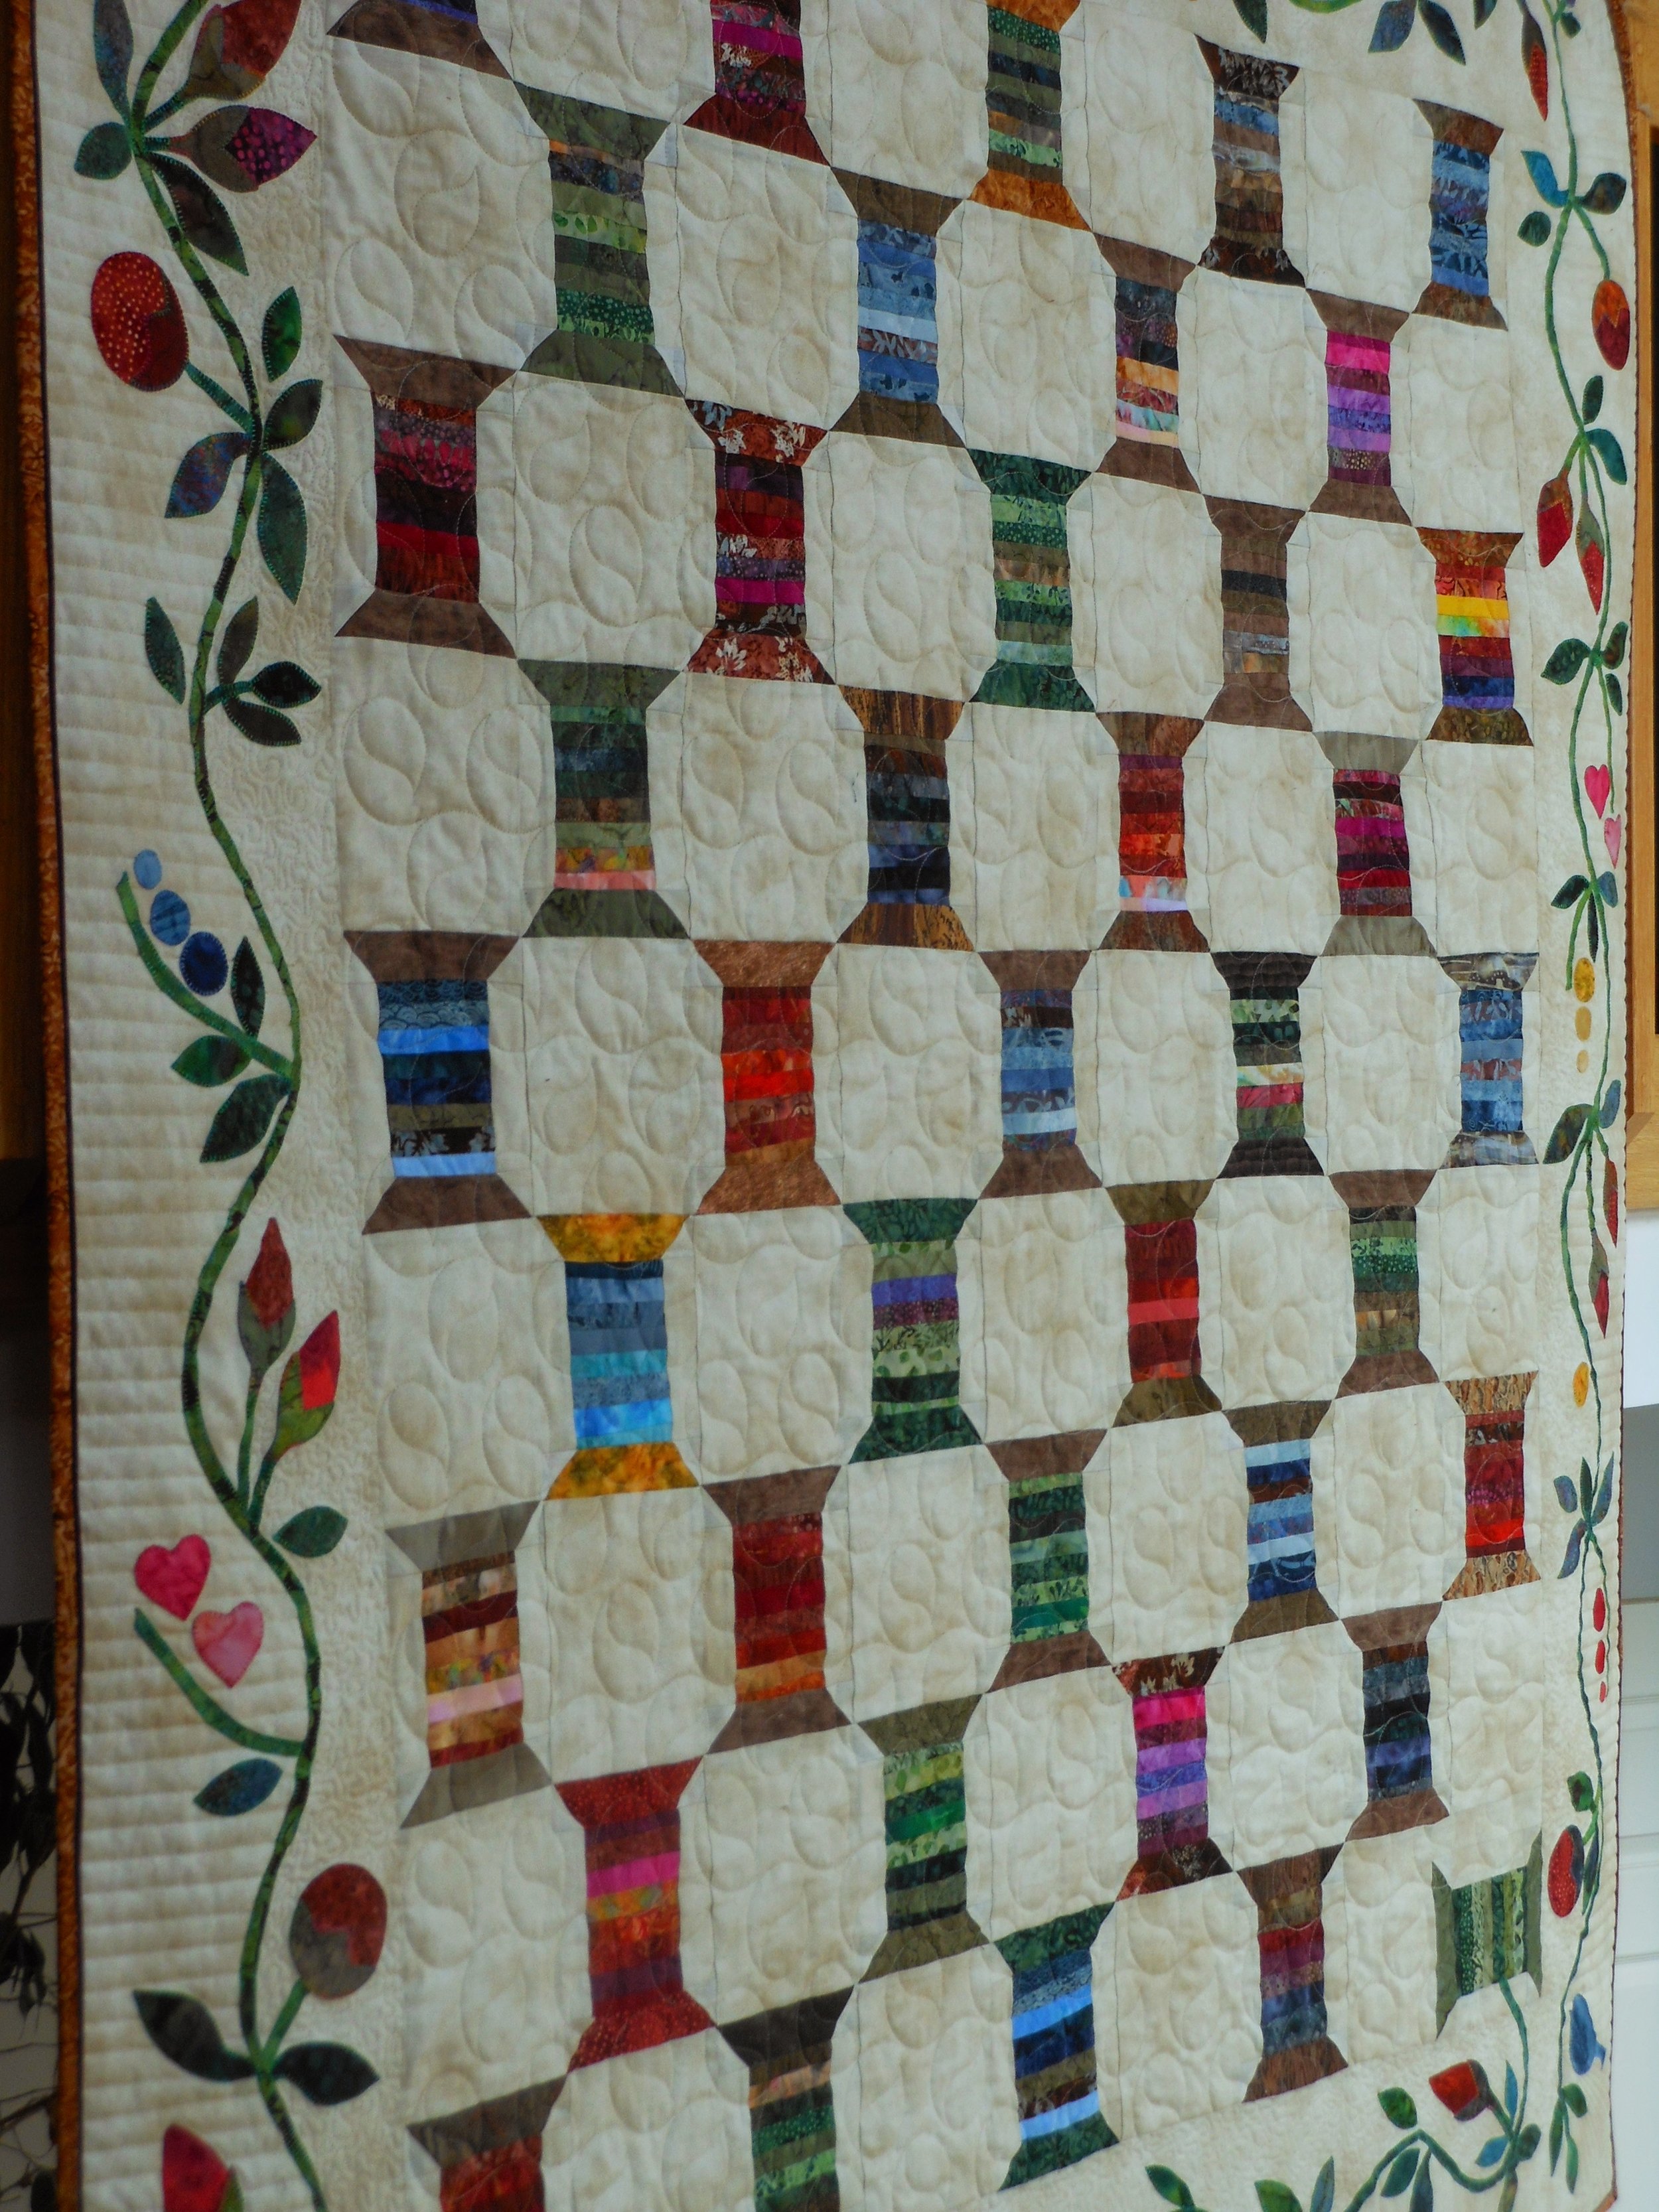 THREAD RACK DIGITAL PATTERN AND DIRECTIONS TO BUILD YOUR OWN — Silver  Forest Quilts